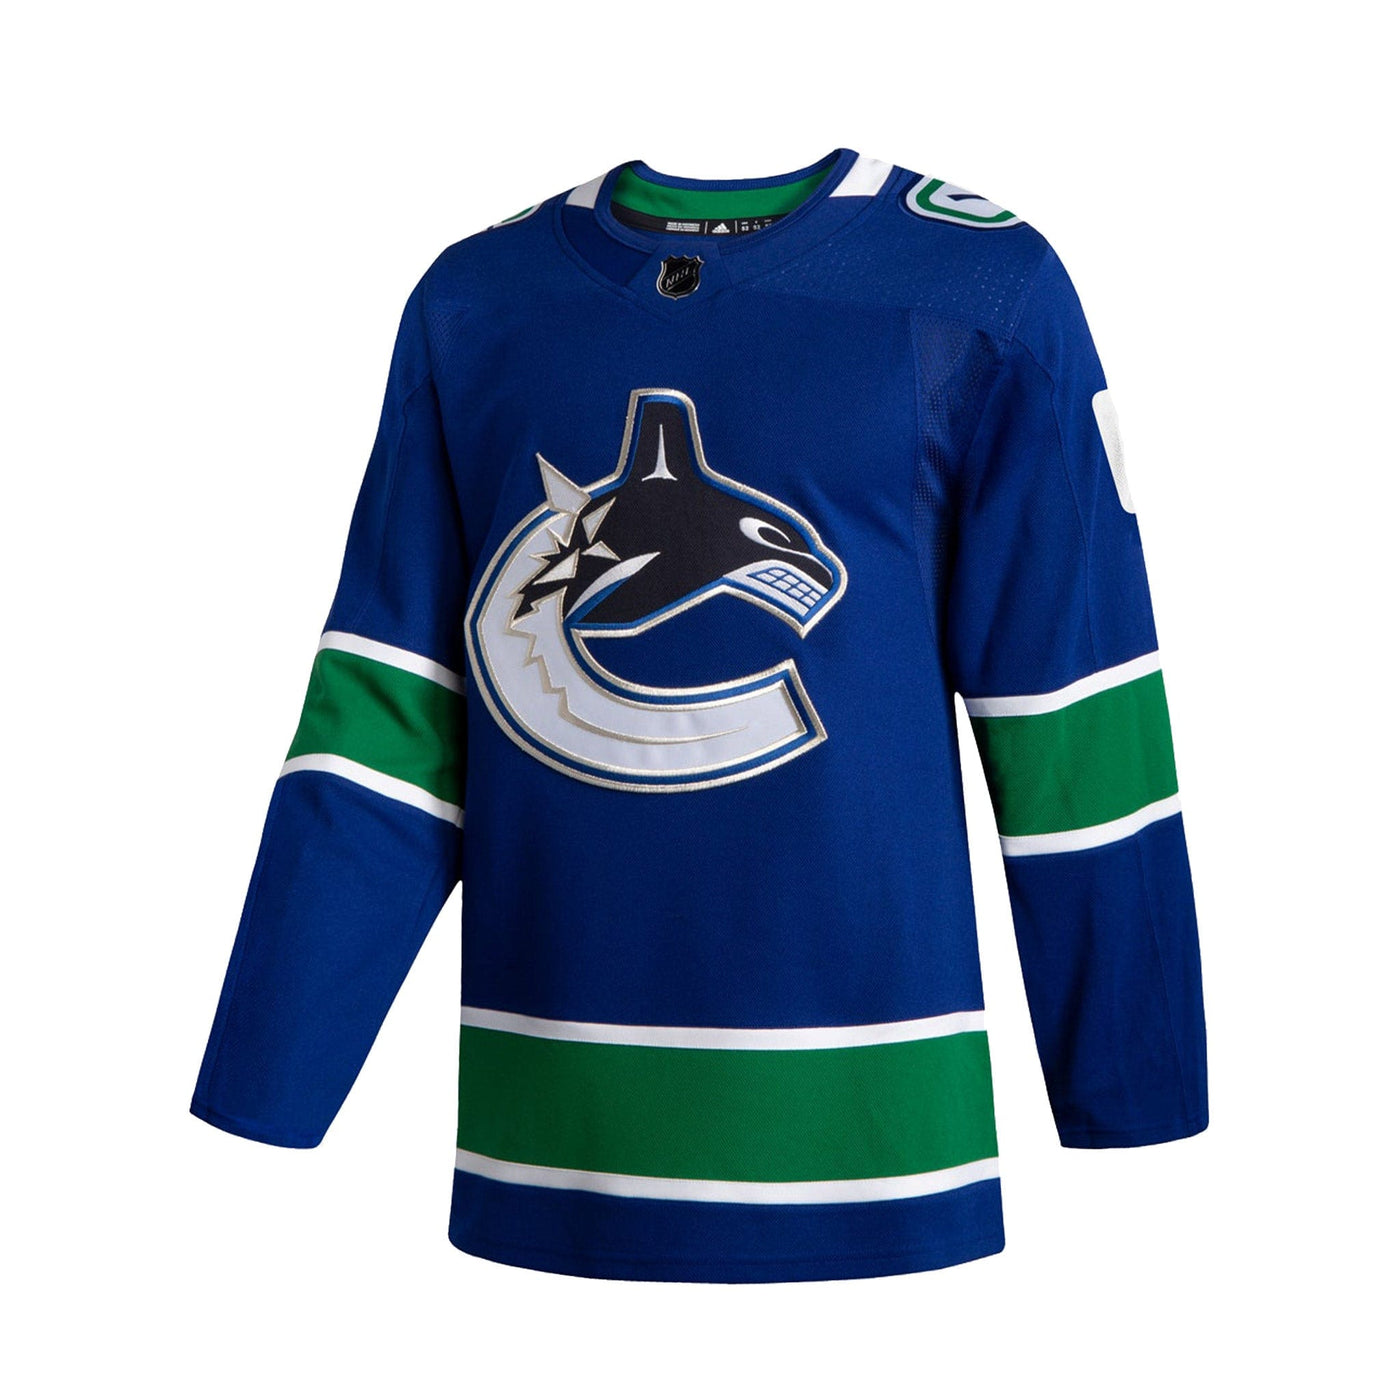 Vancouver Canucks Home Adidas Authentic Senior Jersey - Brock Boeser